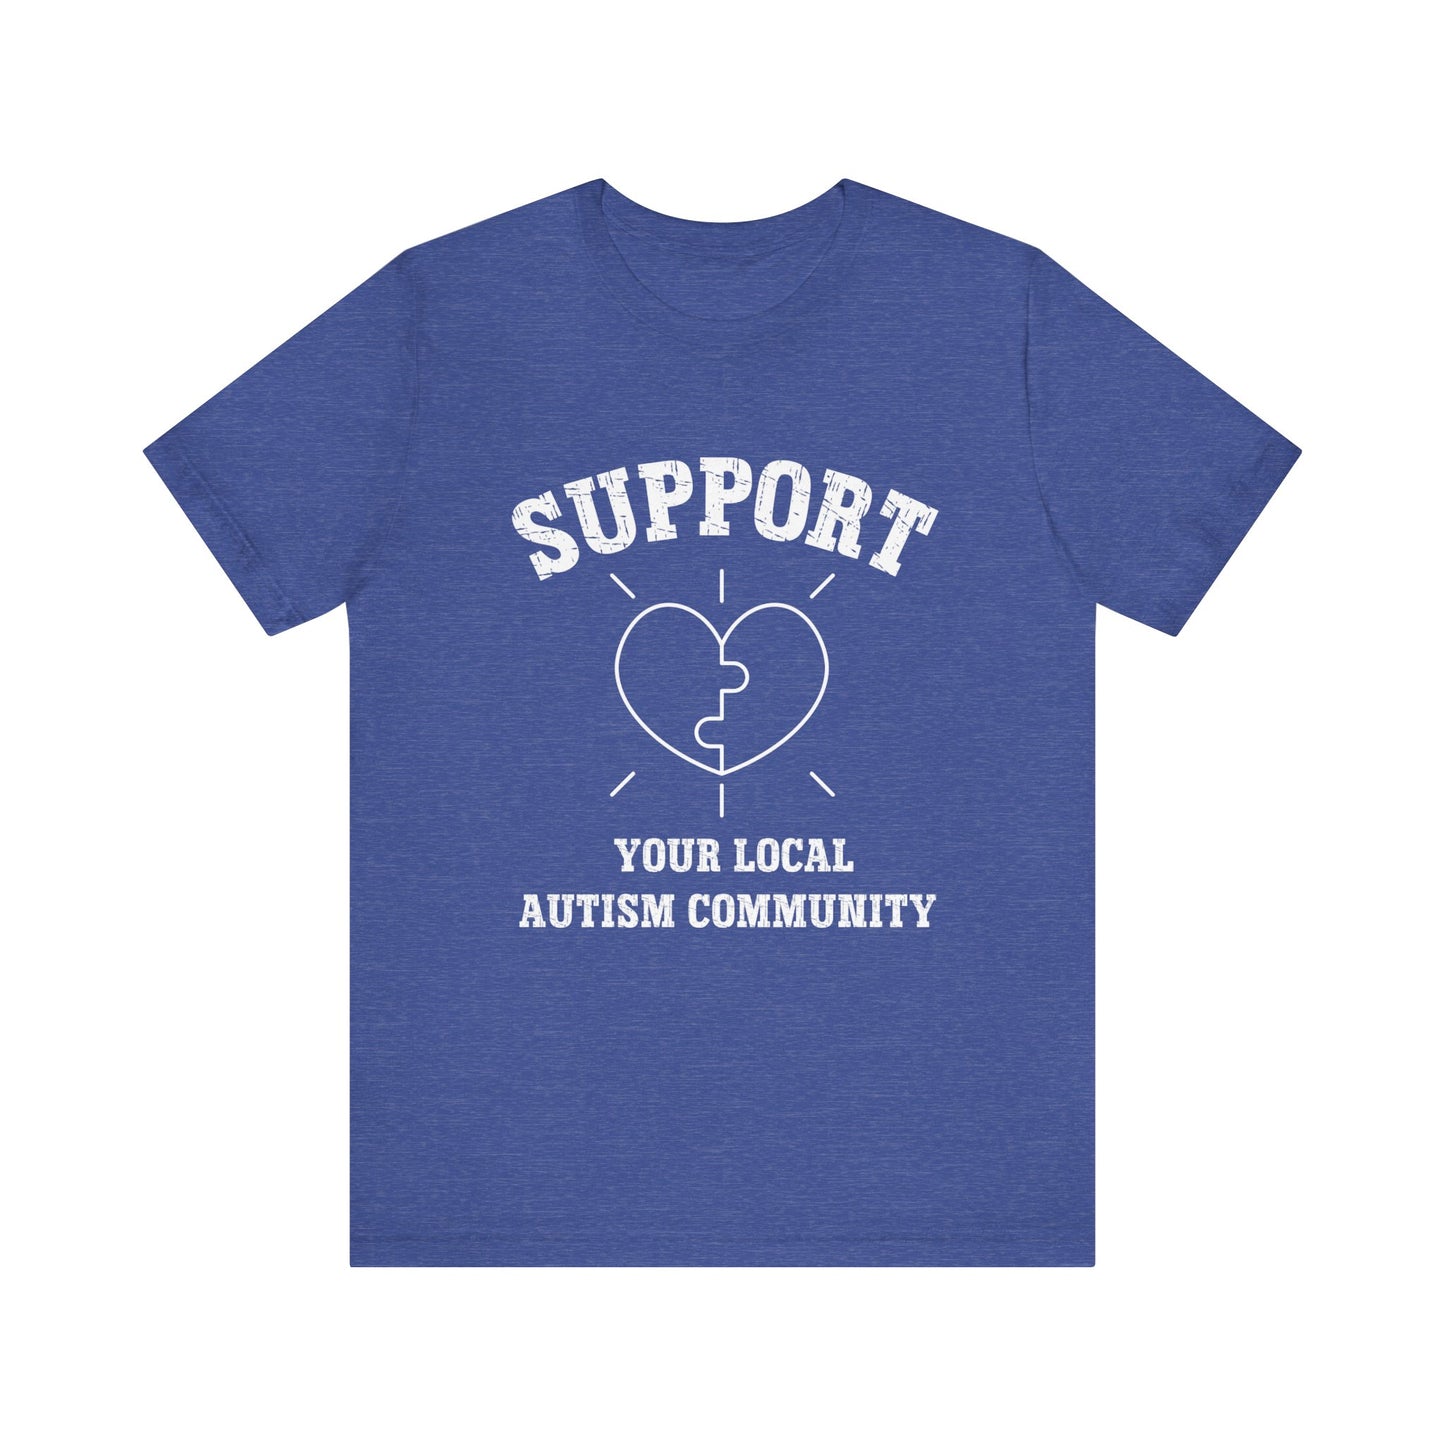 Support Your Local Autism Community  Autism Awareness Adult Unisex Short Sleeve Tee